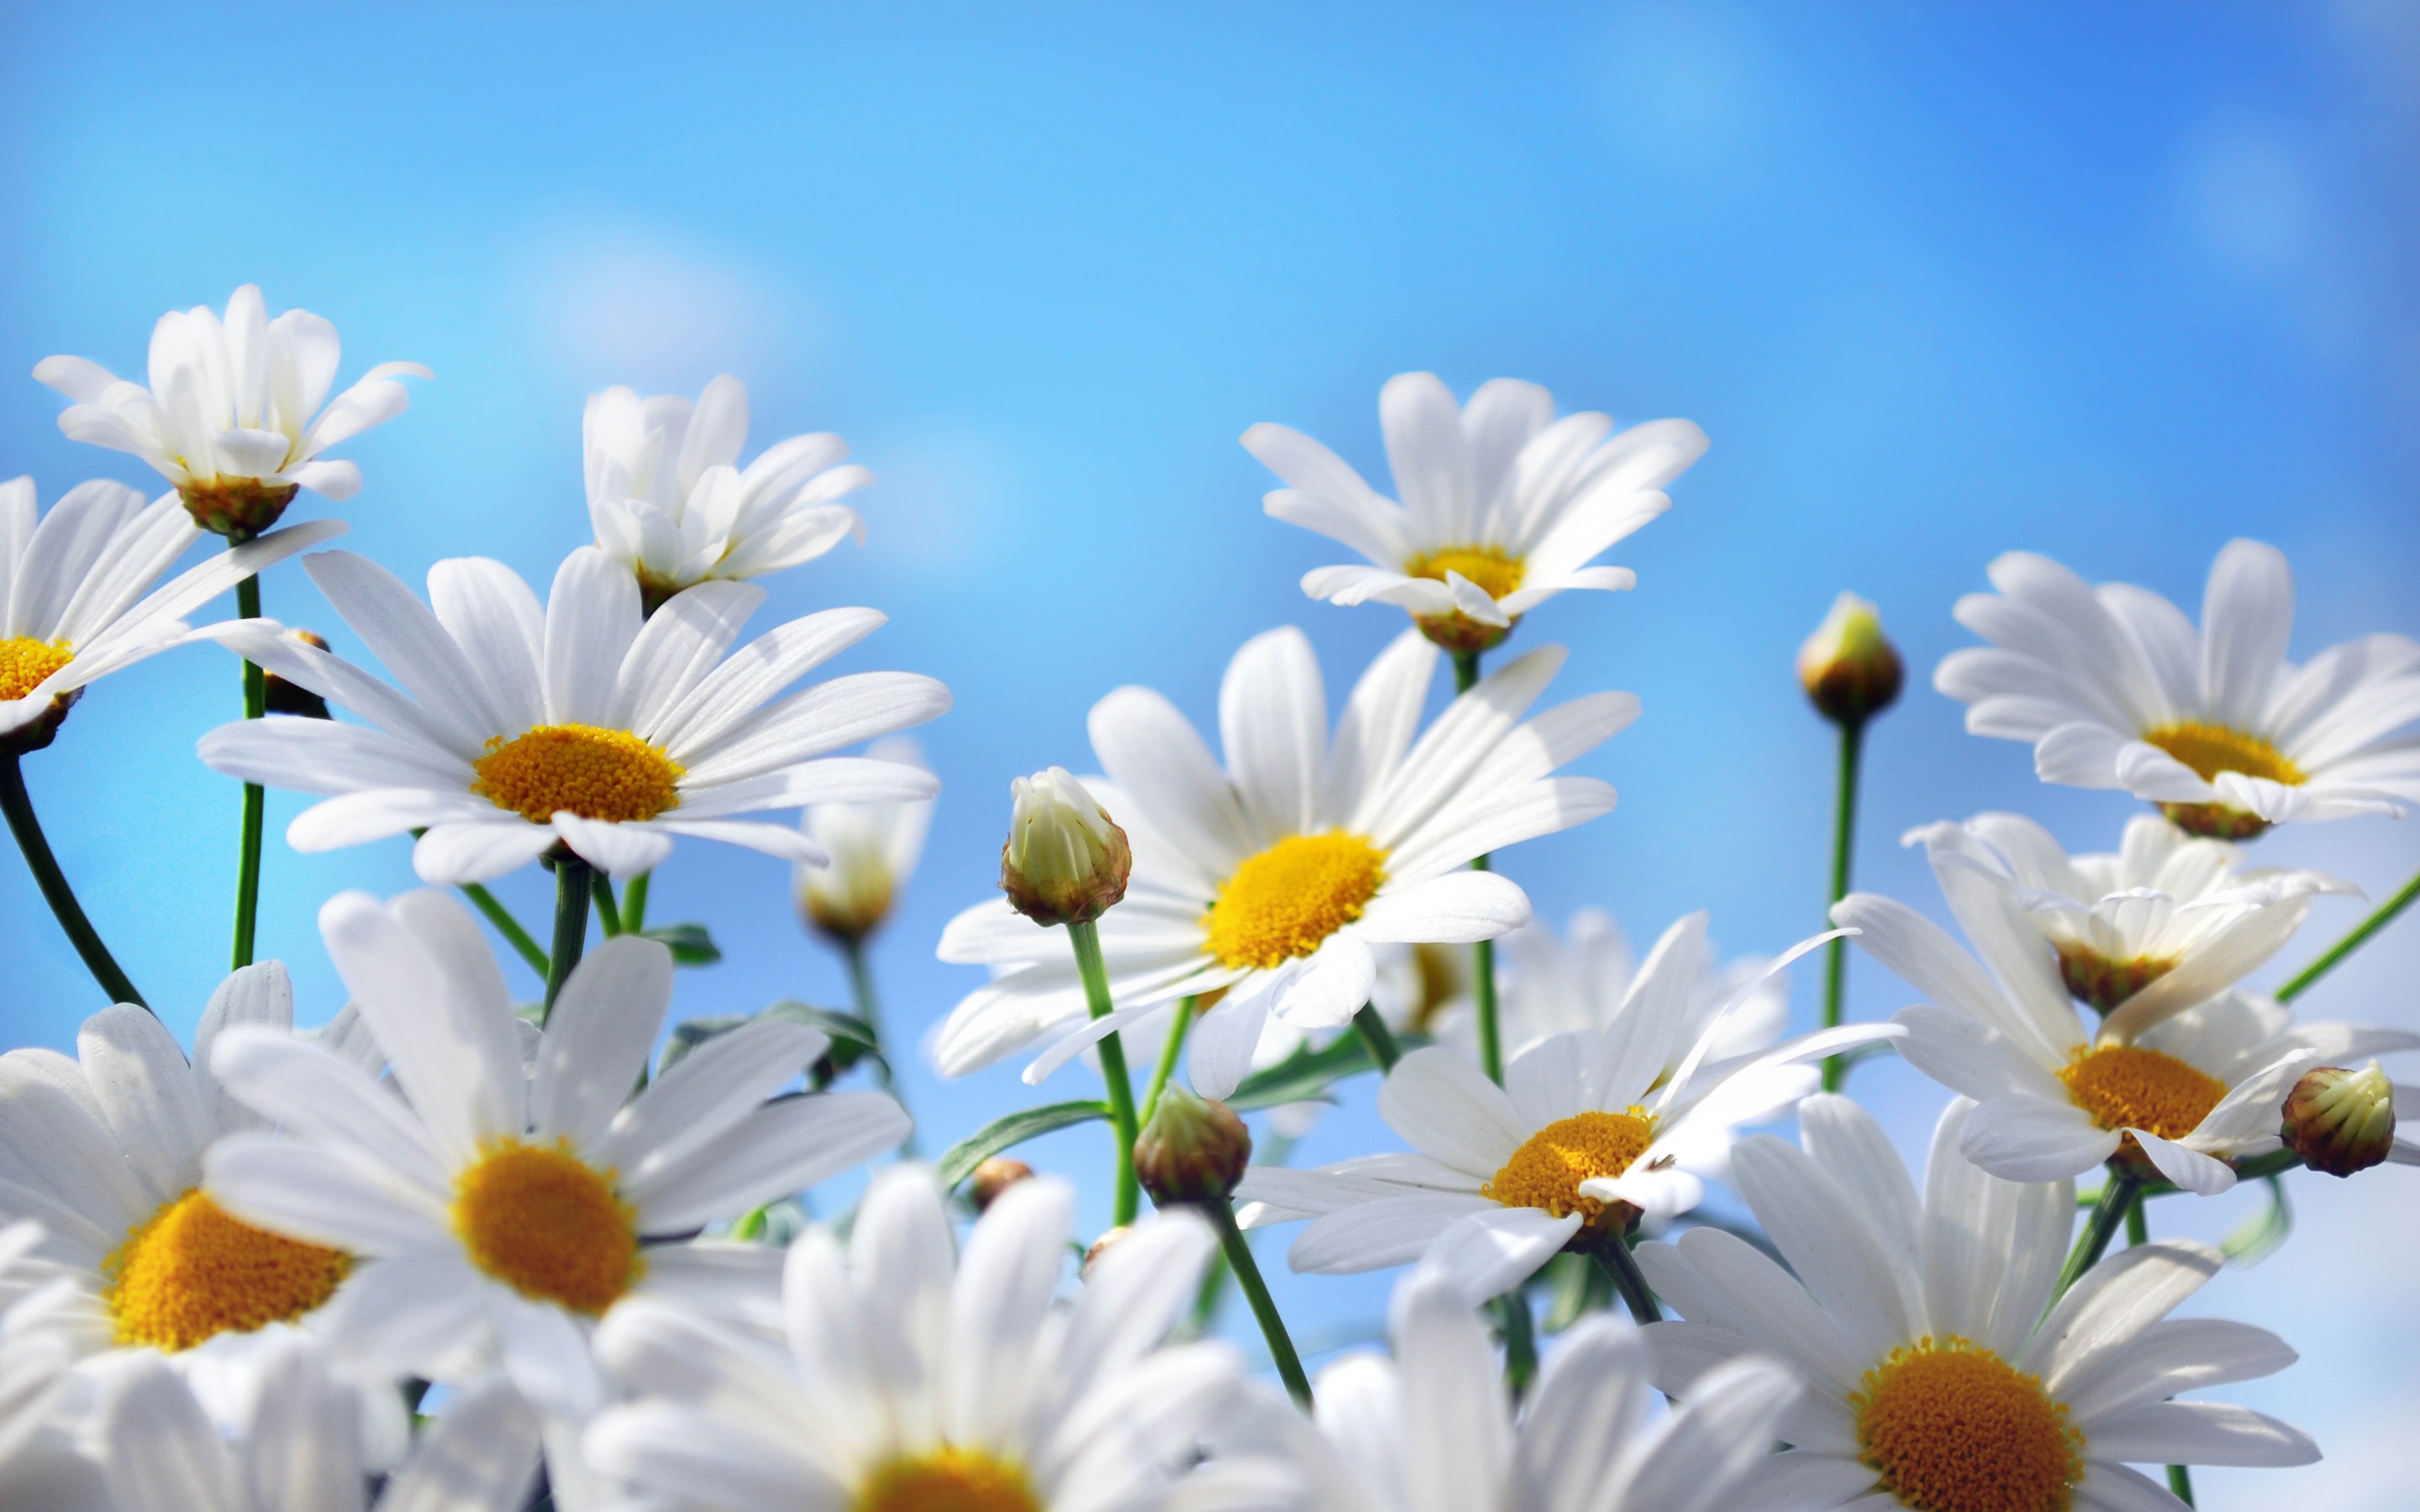 White Flowers Of Chamomile Blue Sky Hd Wallpaper : Wallpapers13.com